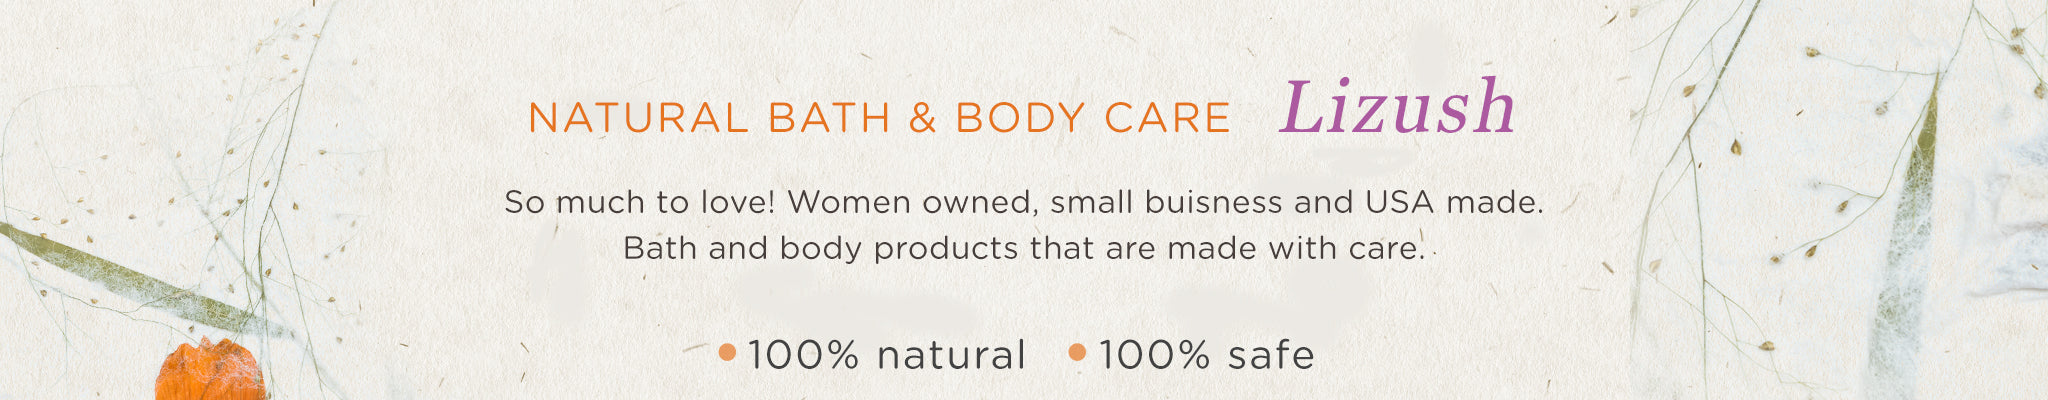 Natural Bath & Body Care | Lizush | So much to love! Women owned, small business, and USA made. Bath and body products that are made with care | 100% Natural | 100% Safe